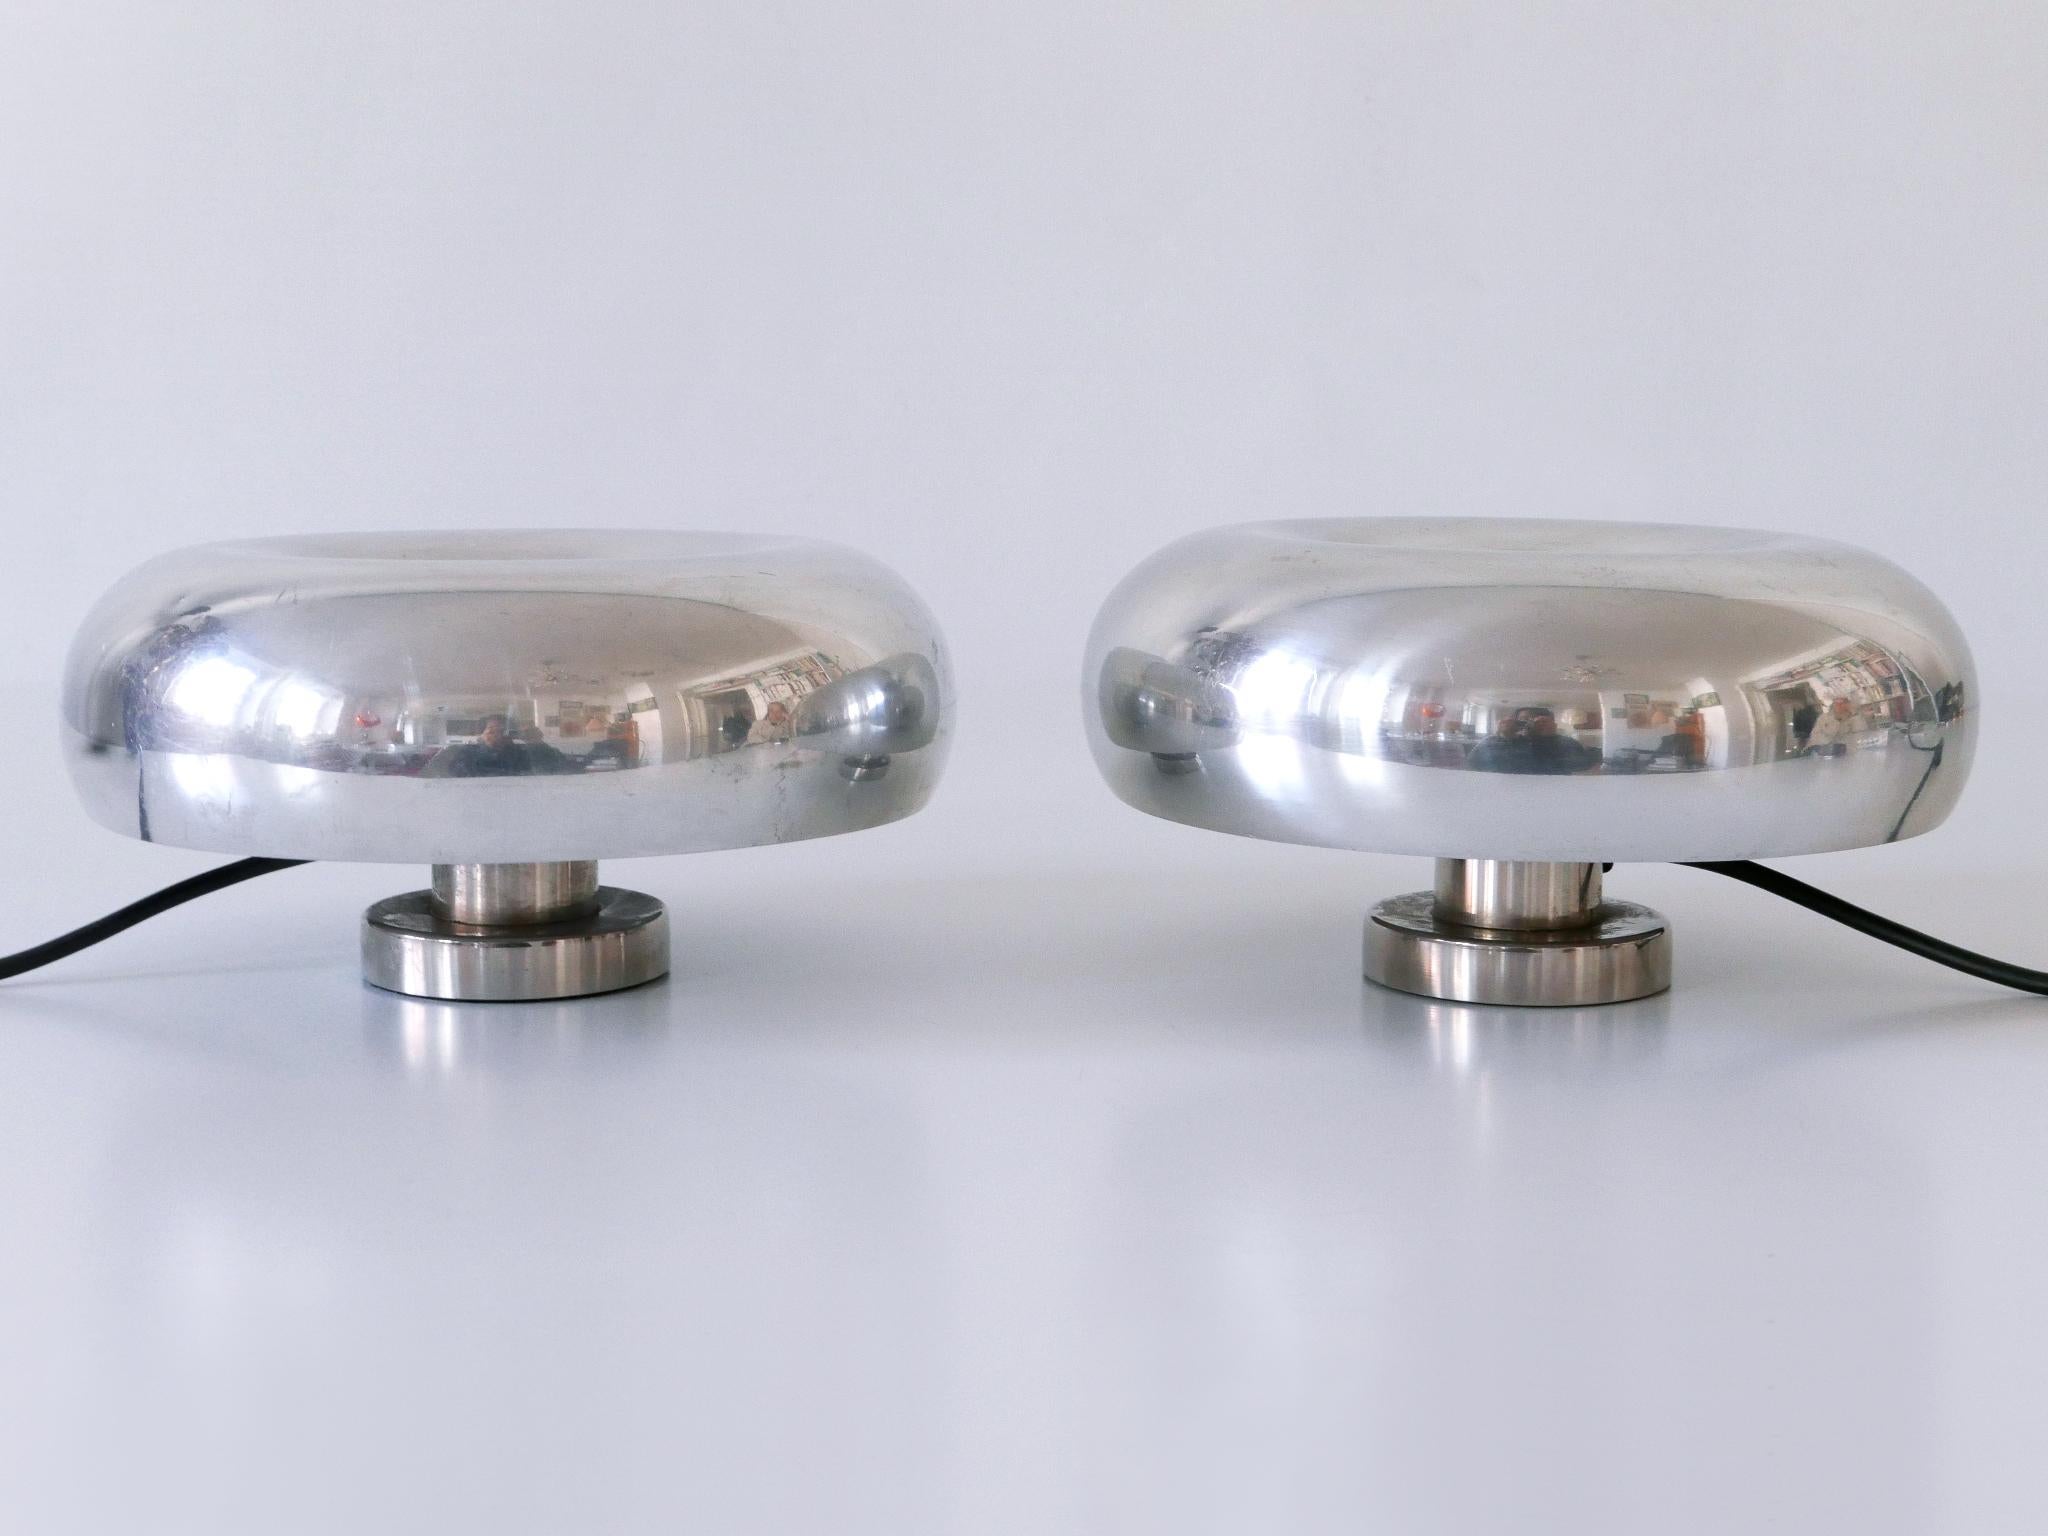 Set of Two Table Lamps or Sconces Pox by Ingo Maurer for Design M Germany, 1960s For Sale 8